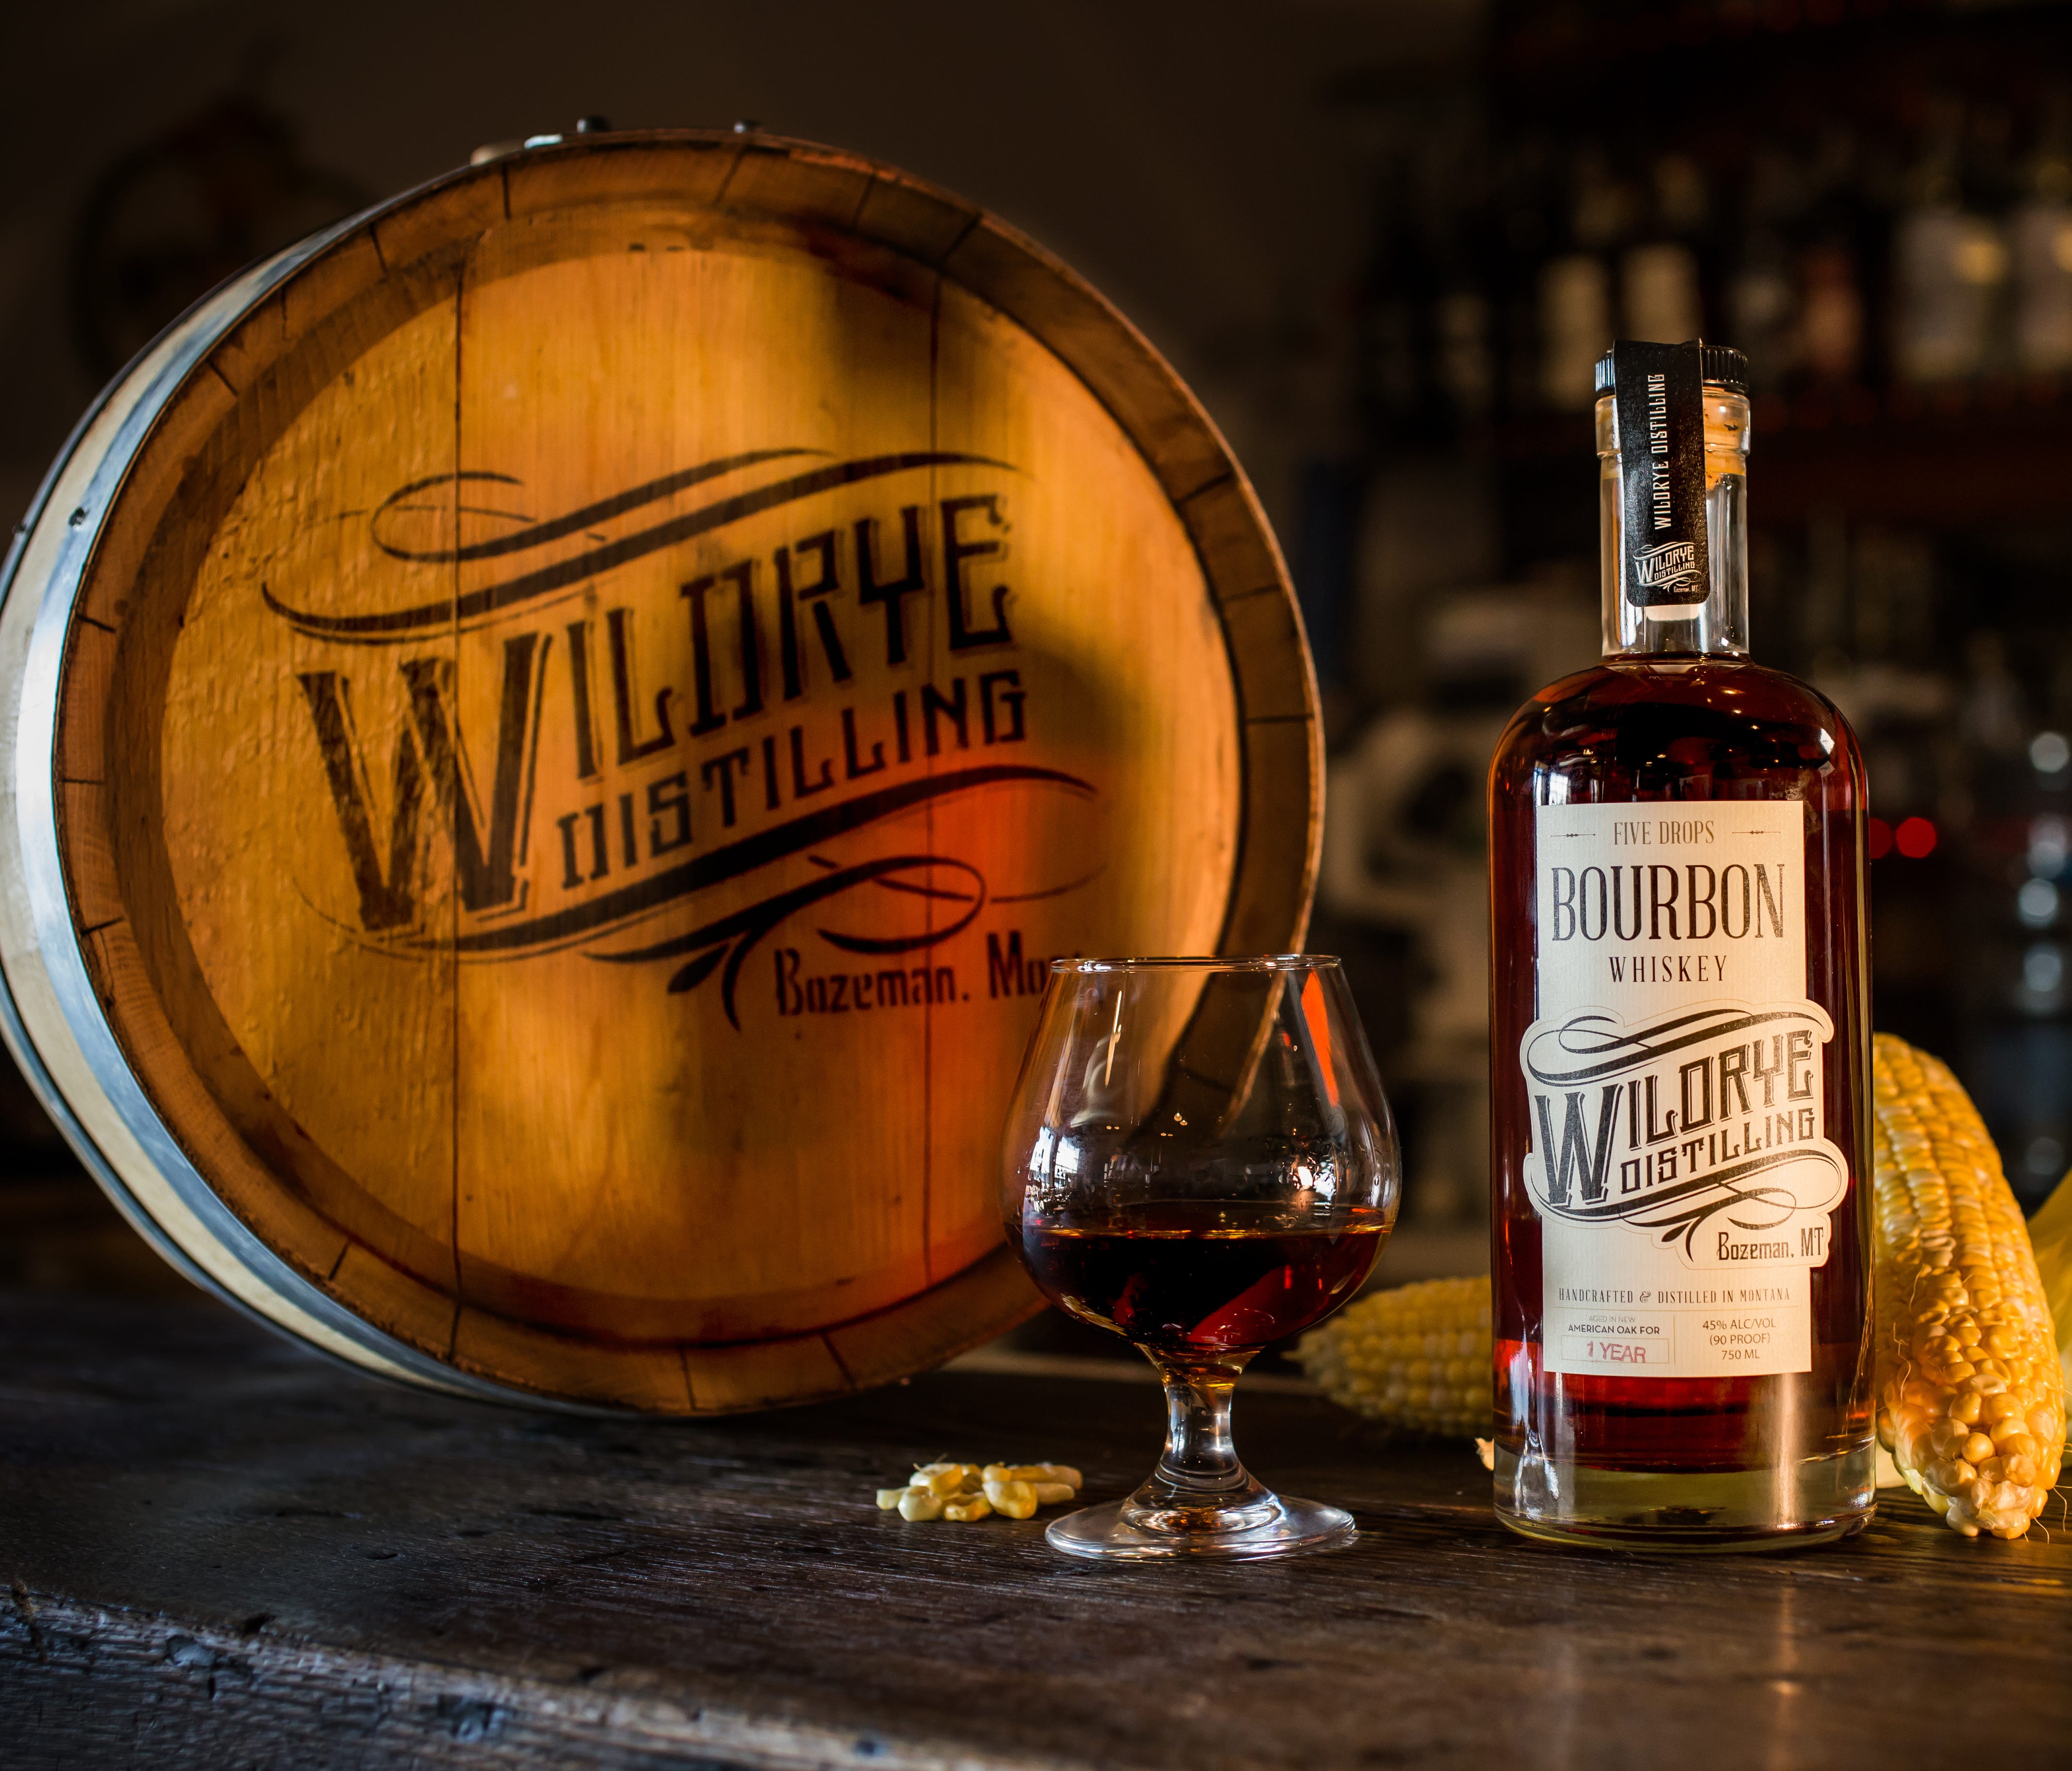 In Bozeman, Mont., Wildrye Distilling's Five Drops Bourbon is made from a mash bill of sweetcorn (grown by the distillery CEO's father-in-law) and barley, with no other flavoring grains like rye or wheat. The bourbon is aged in small charred oak barr